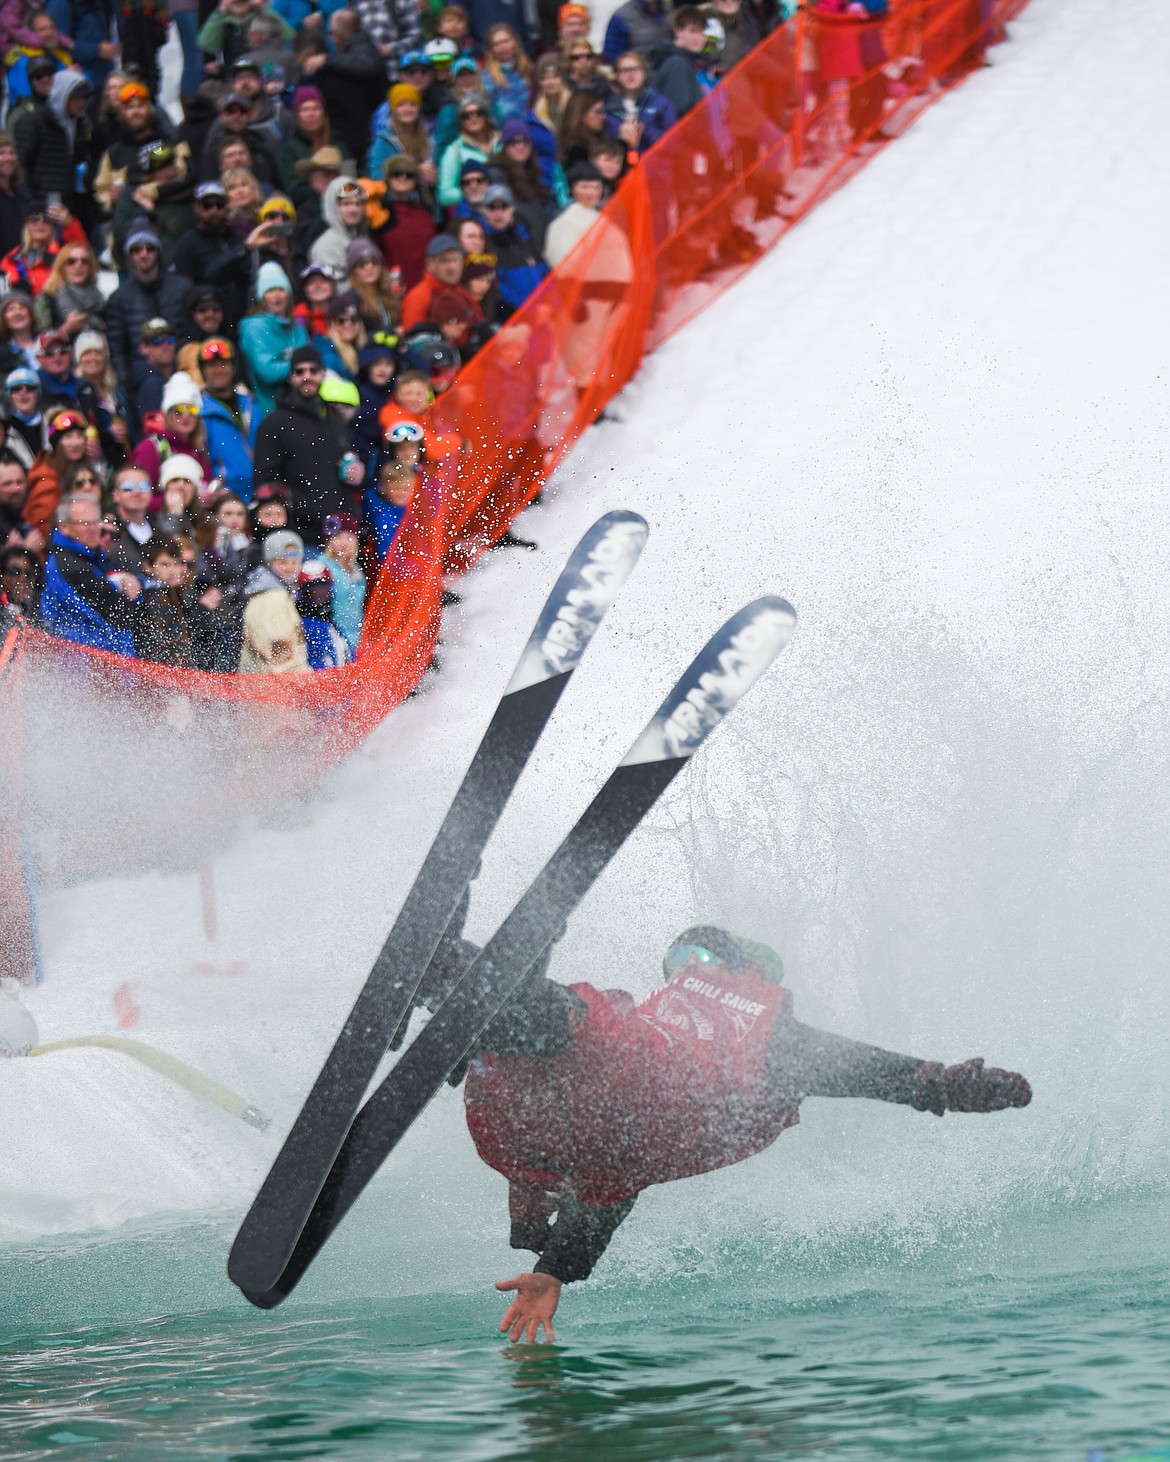 Rob Brekke, dressed as &#147;hot sauce,&#148; takes a not-so-hot fall during the 2019 Pond Skim on Saturday at Whitefish Mountain Resort. (Daniel McKay/Whitefish Pilot)